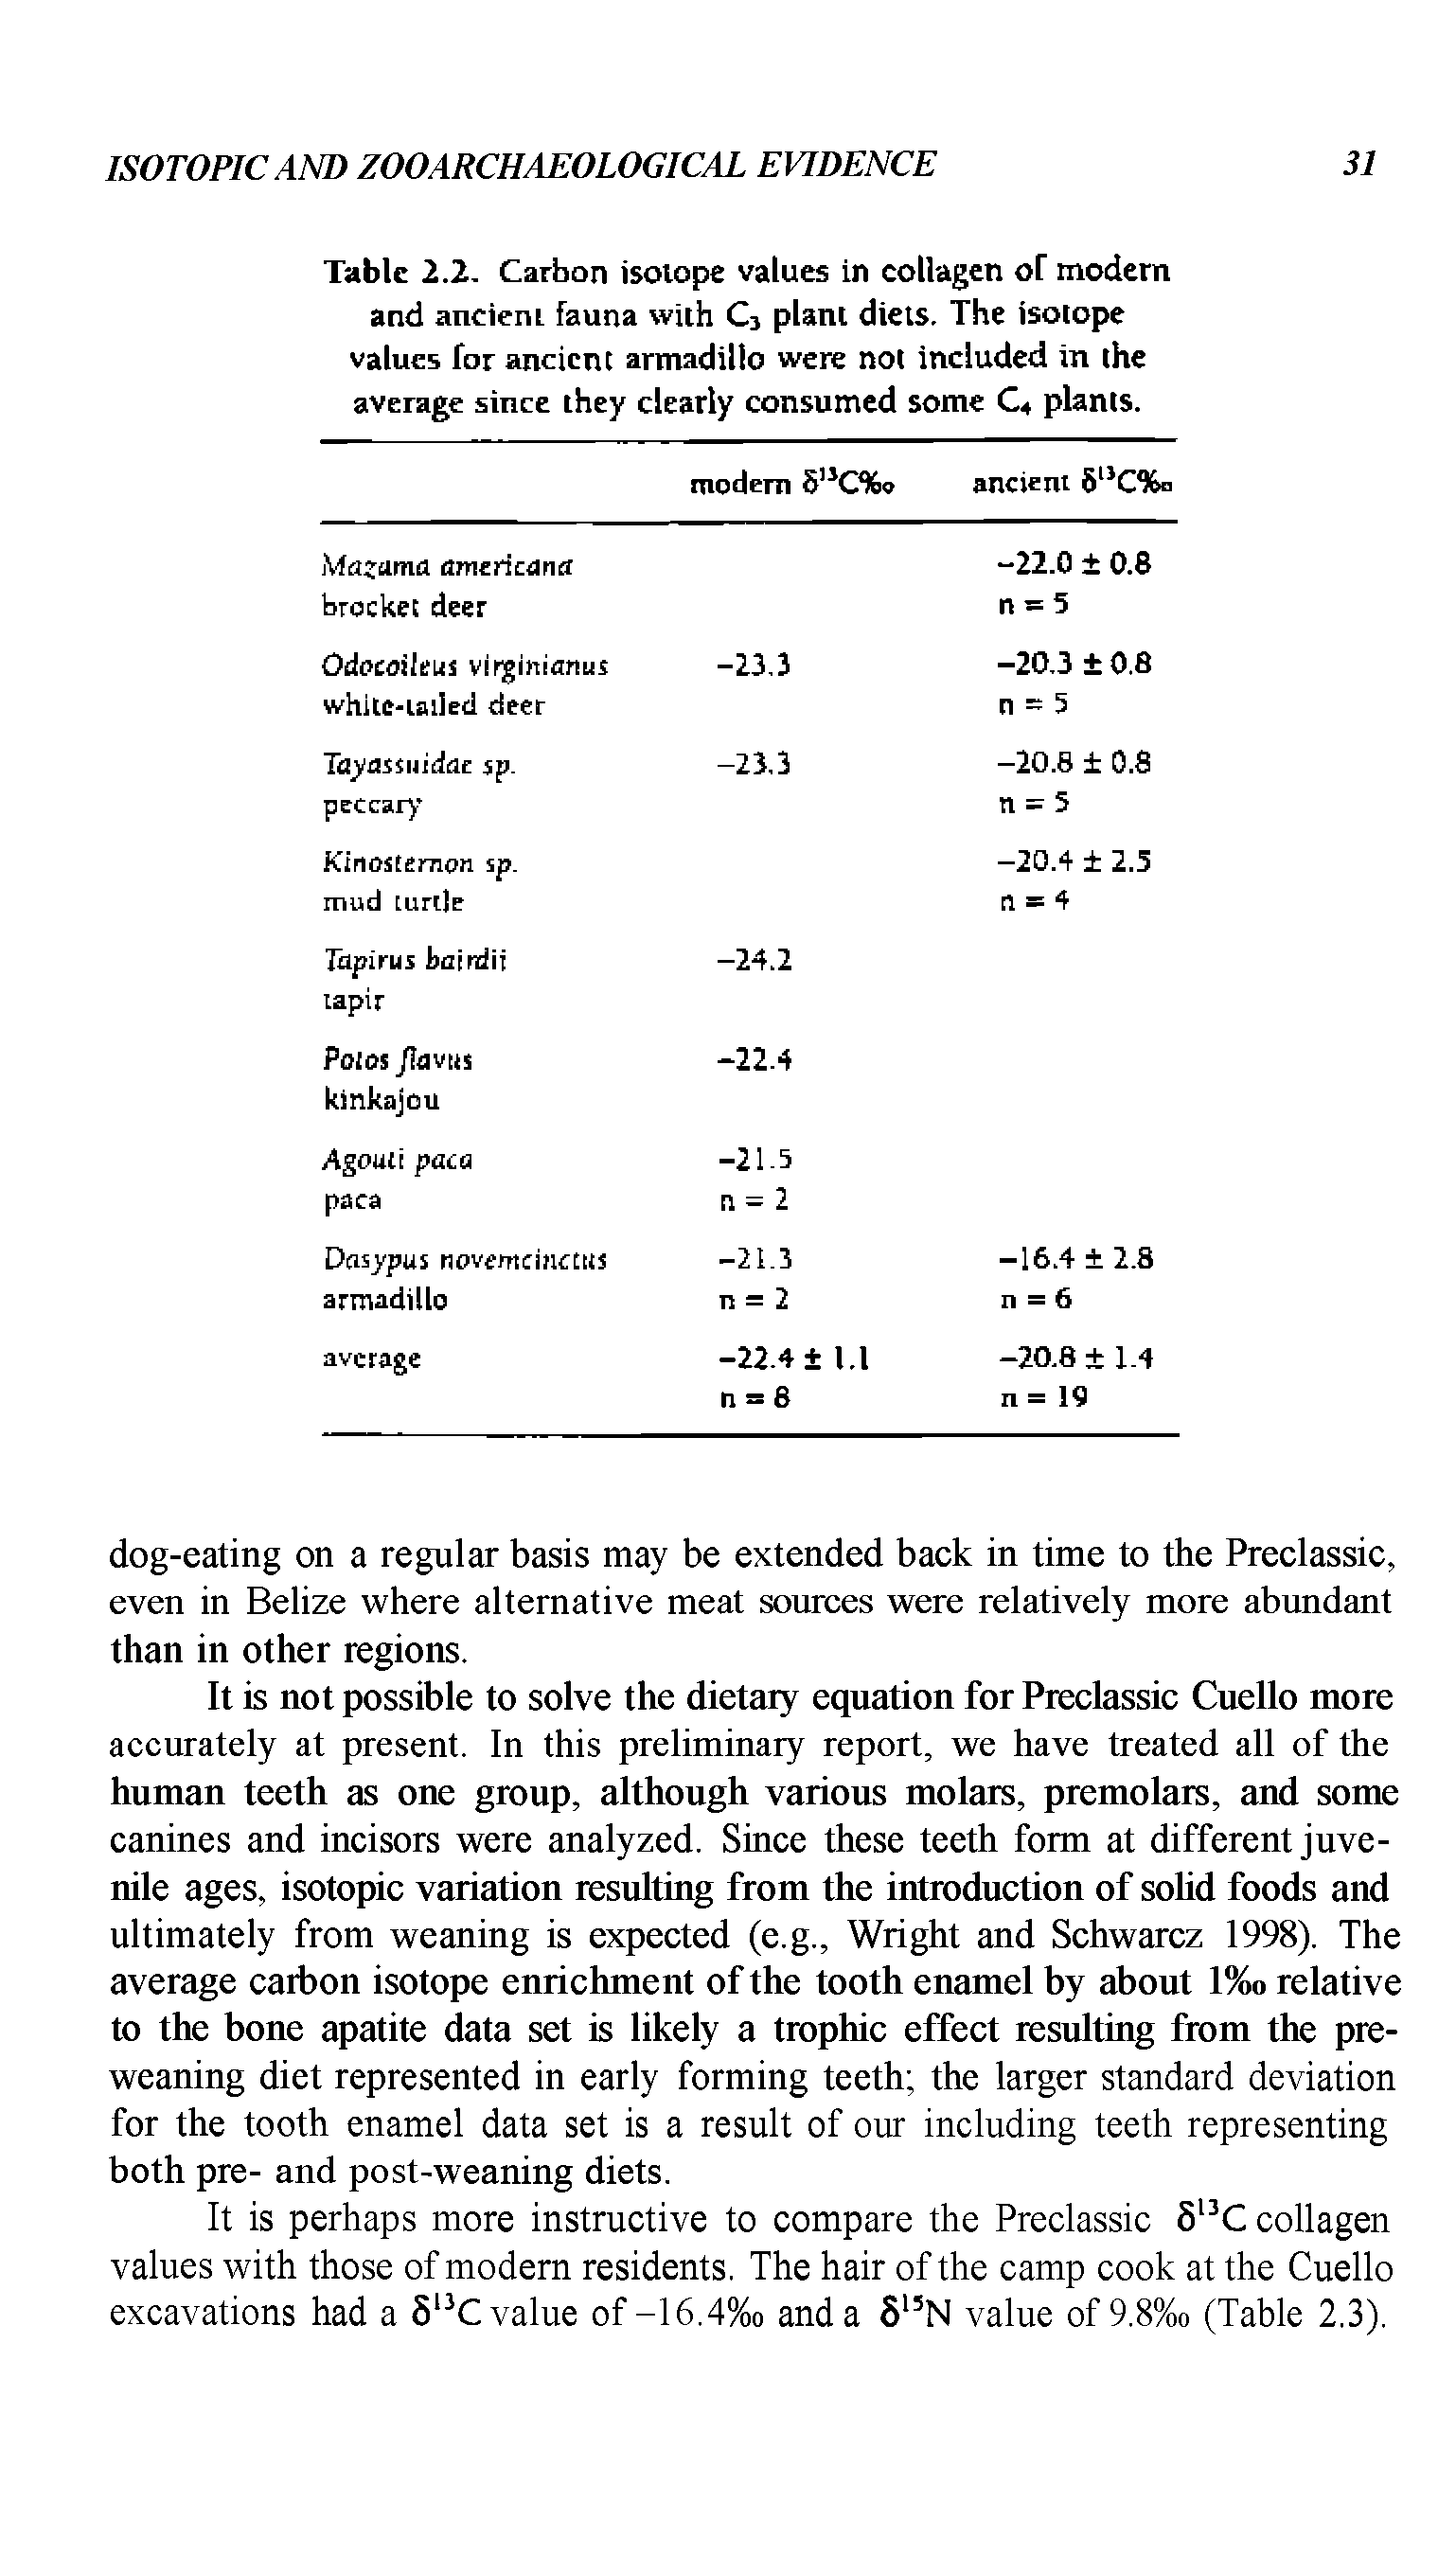 Table 2.2. Carbon isolope values in collagen of modern and ancicni fauna wiih C3 plant diets. The isotope values for ancient armadillo were not included in the average since they dearly consumed some C4 plants.